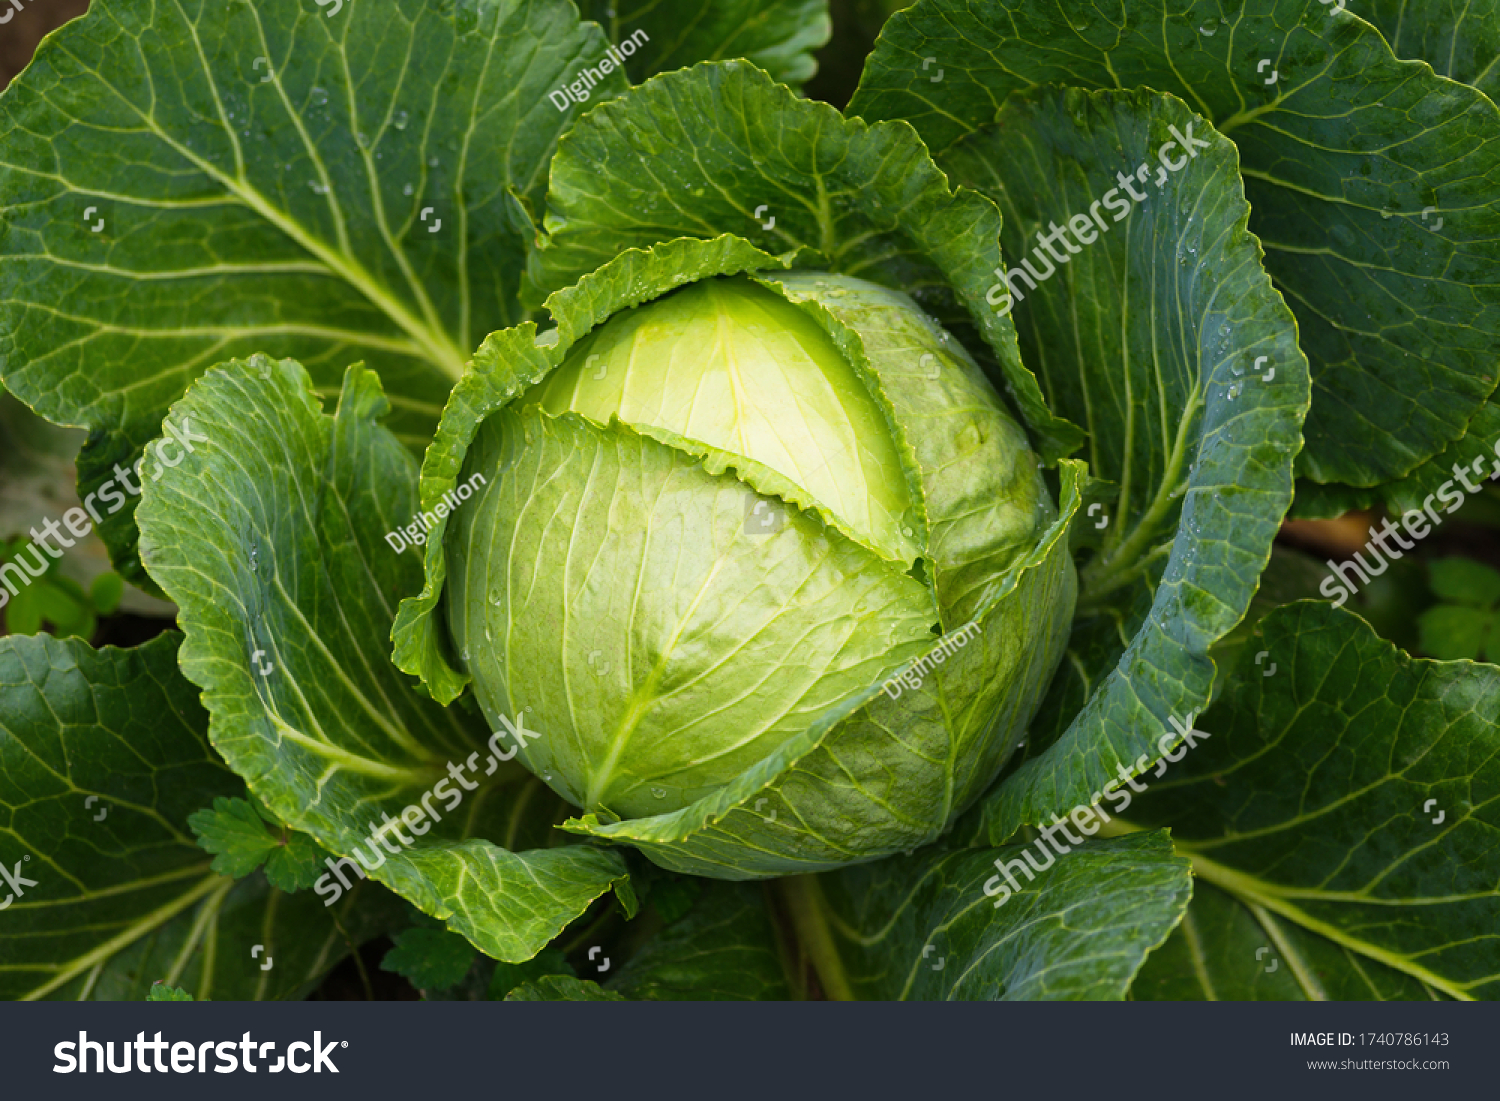 Fresh ripe head of green cabbage (Brassica oleracea) with lots of leaves growing in homemade garden, short before the harvest. Organic farming, healthy food, BIO viands, back to nature concept. #1740786143